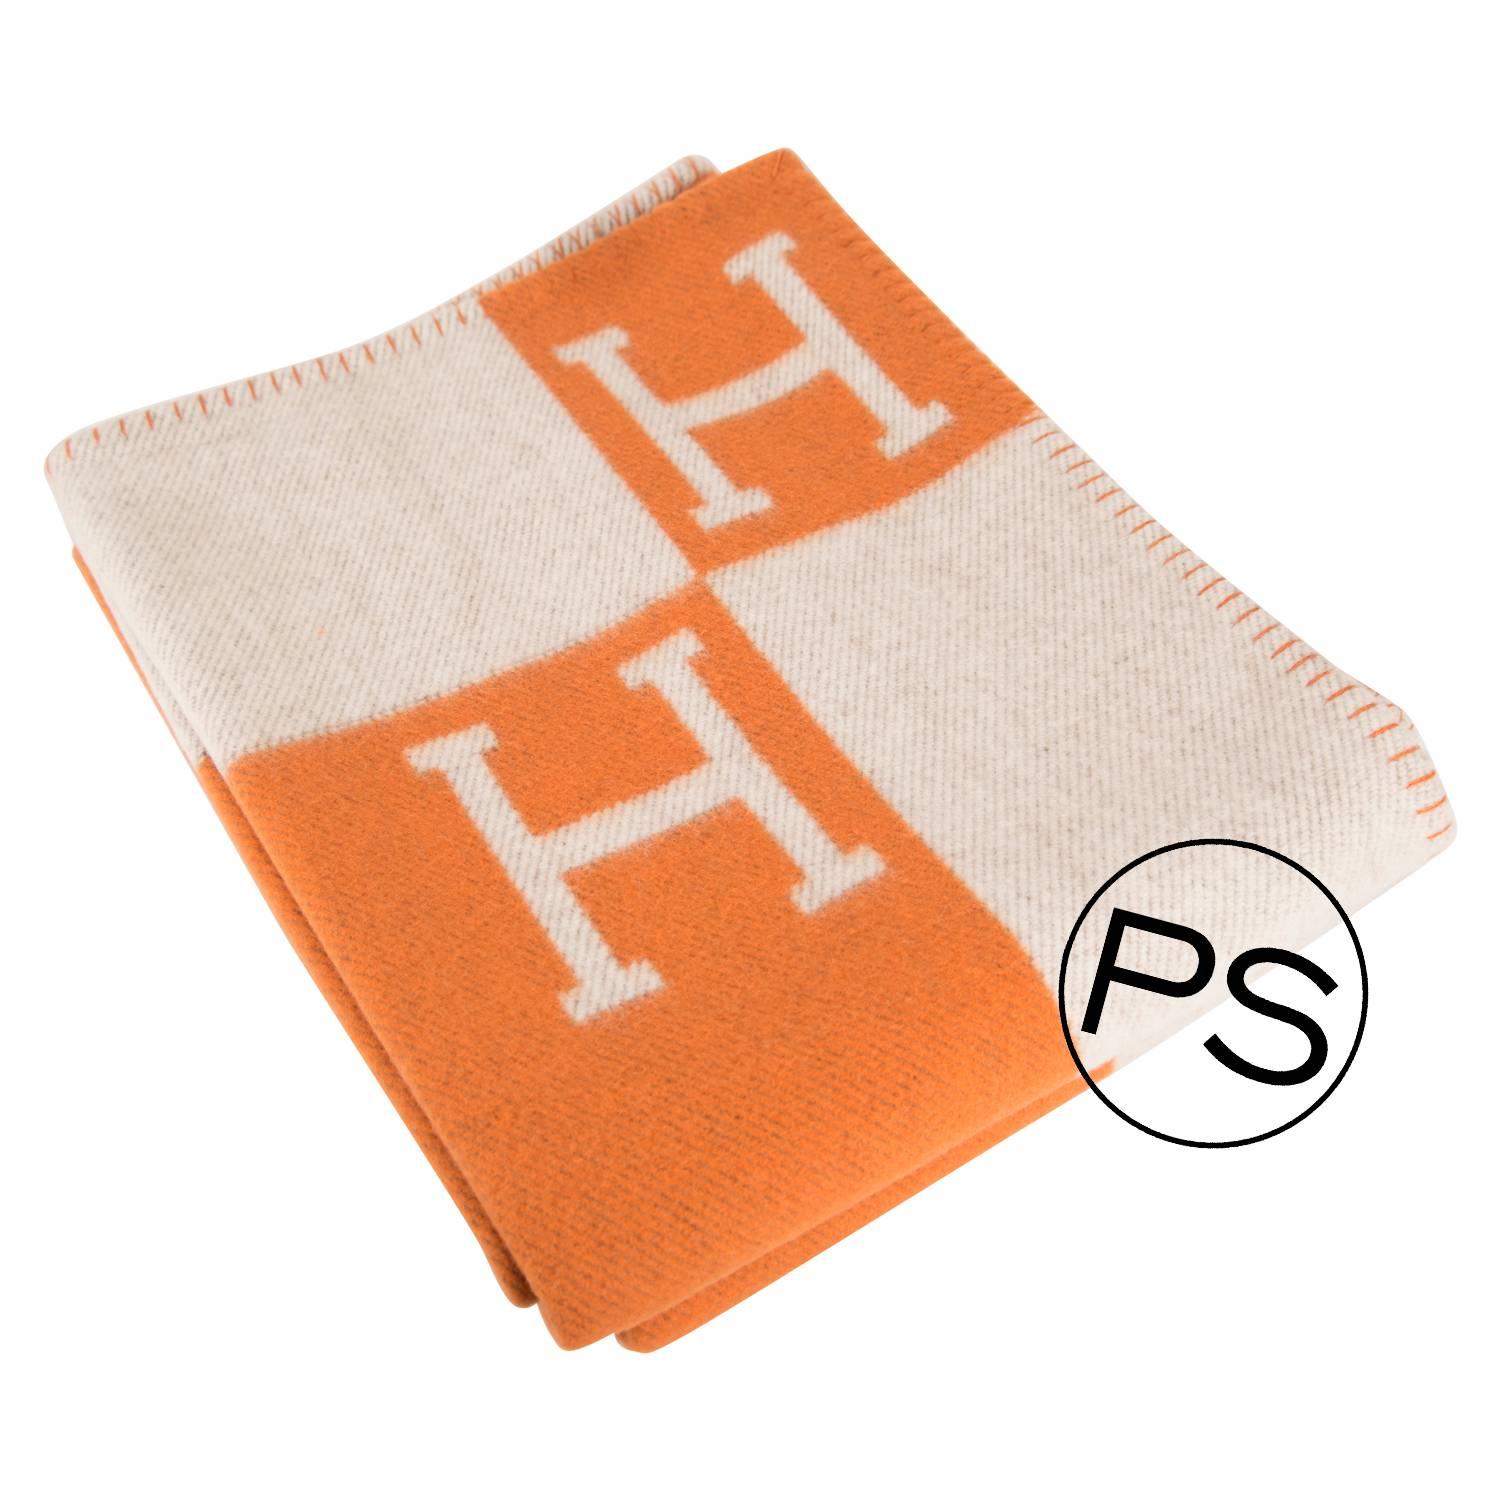 Hermes Avalon Blanket Couch ECRU POTIRON 2015.

Pre-owned and never used.

Bought it in Hermes store in 2015.

Model: AVALON.

Color: ECRU POTIRON. 

Dimension: 135cm width x 165cm large.

Details:
*Protective felt removed for purposes